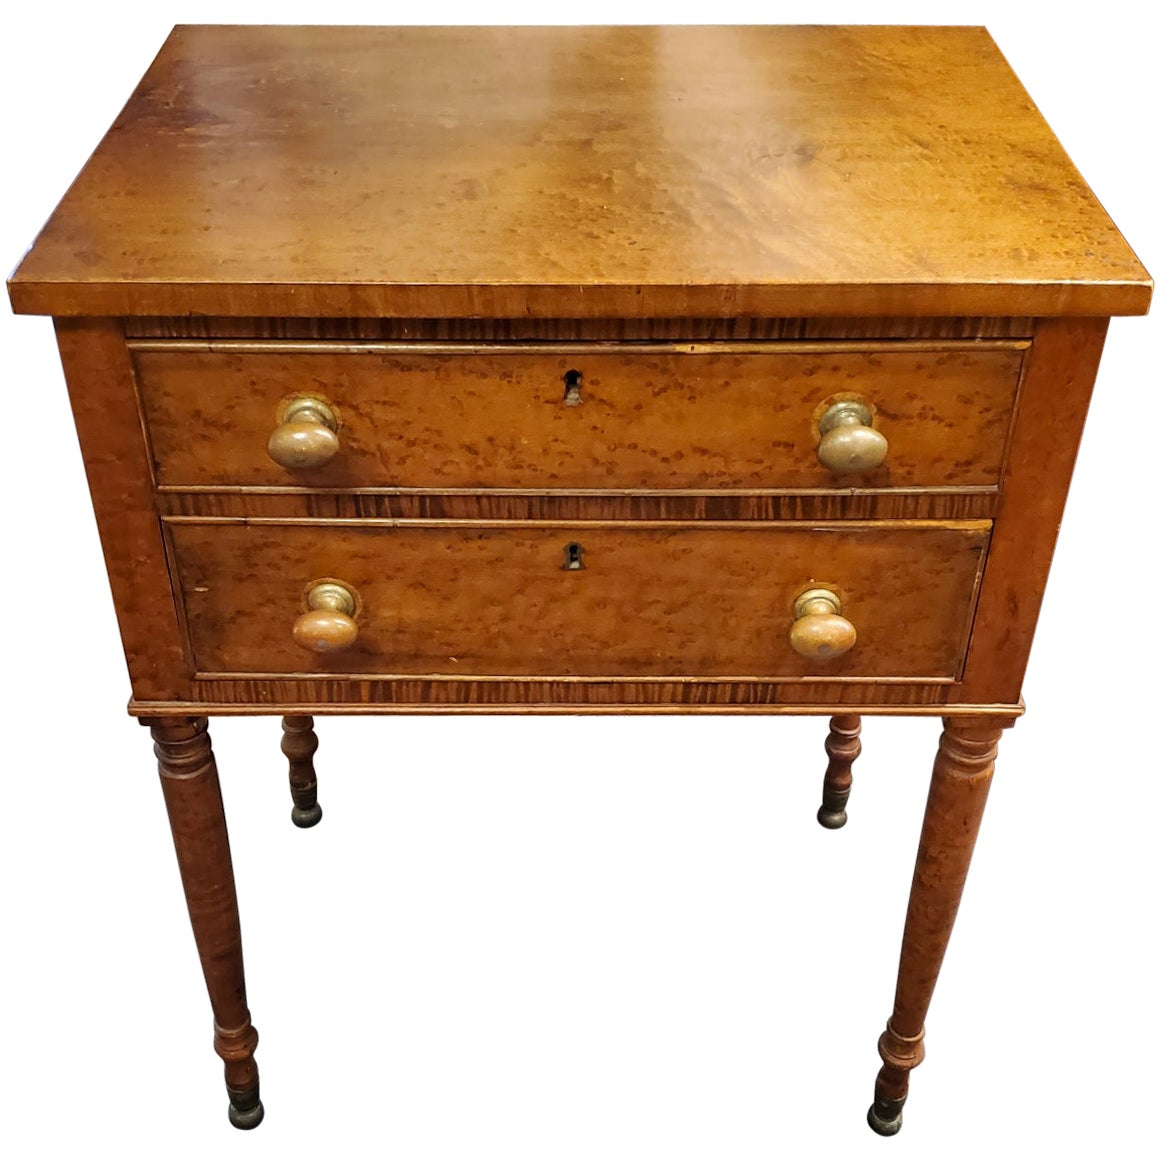 Mid 19th Century New England Birdseye Maple Side Table with Two Drawers